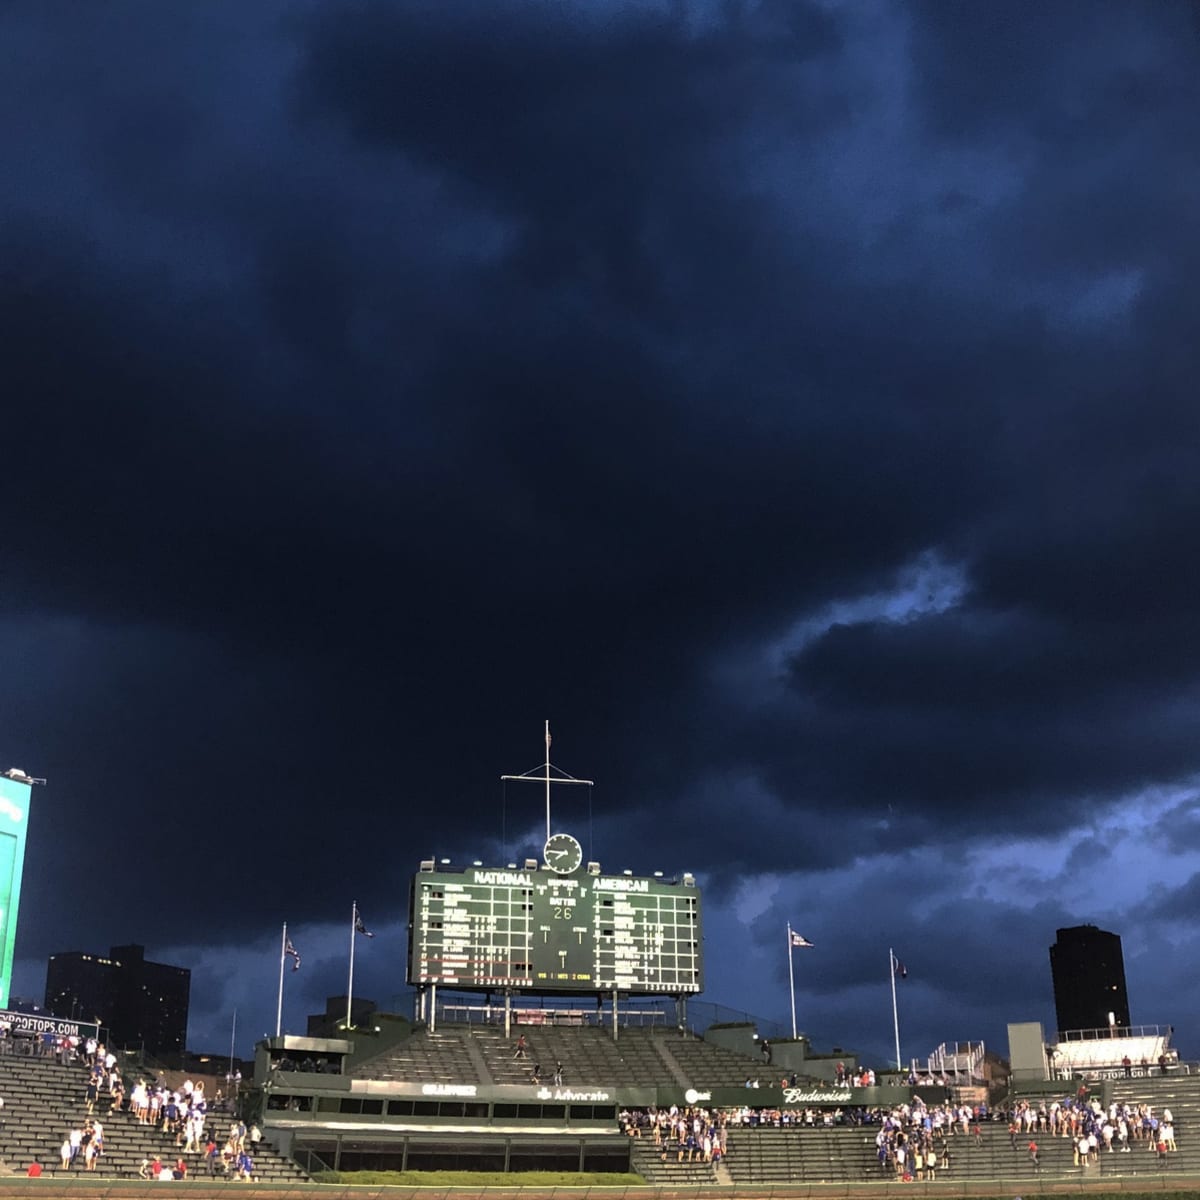 Dodgers' game against Cubs on Friday postponed because of rain